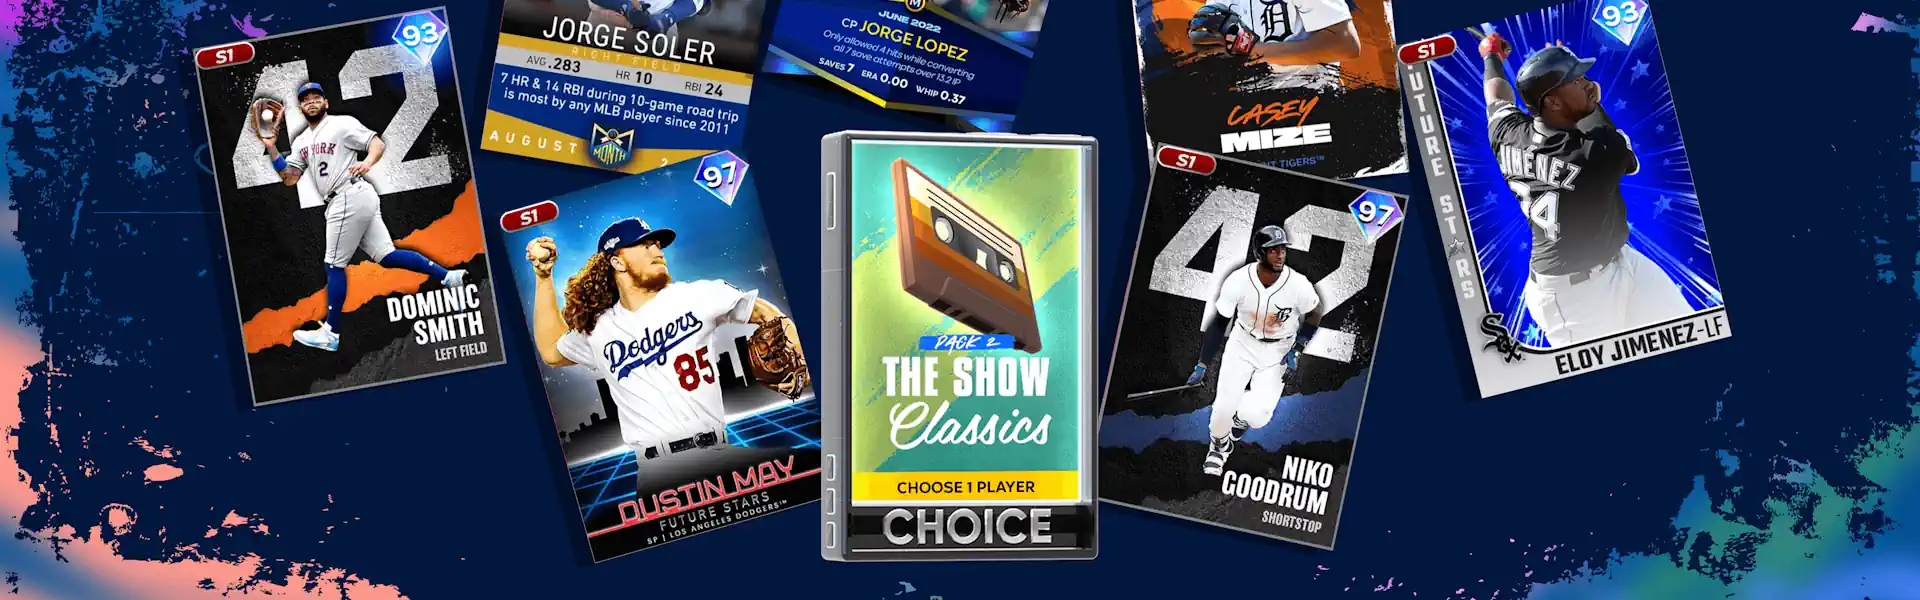 The Show Classics Pack 2